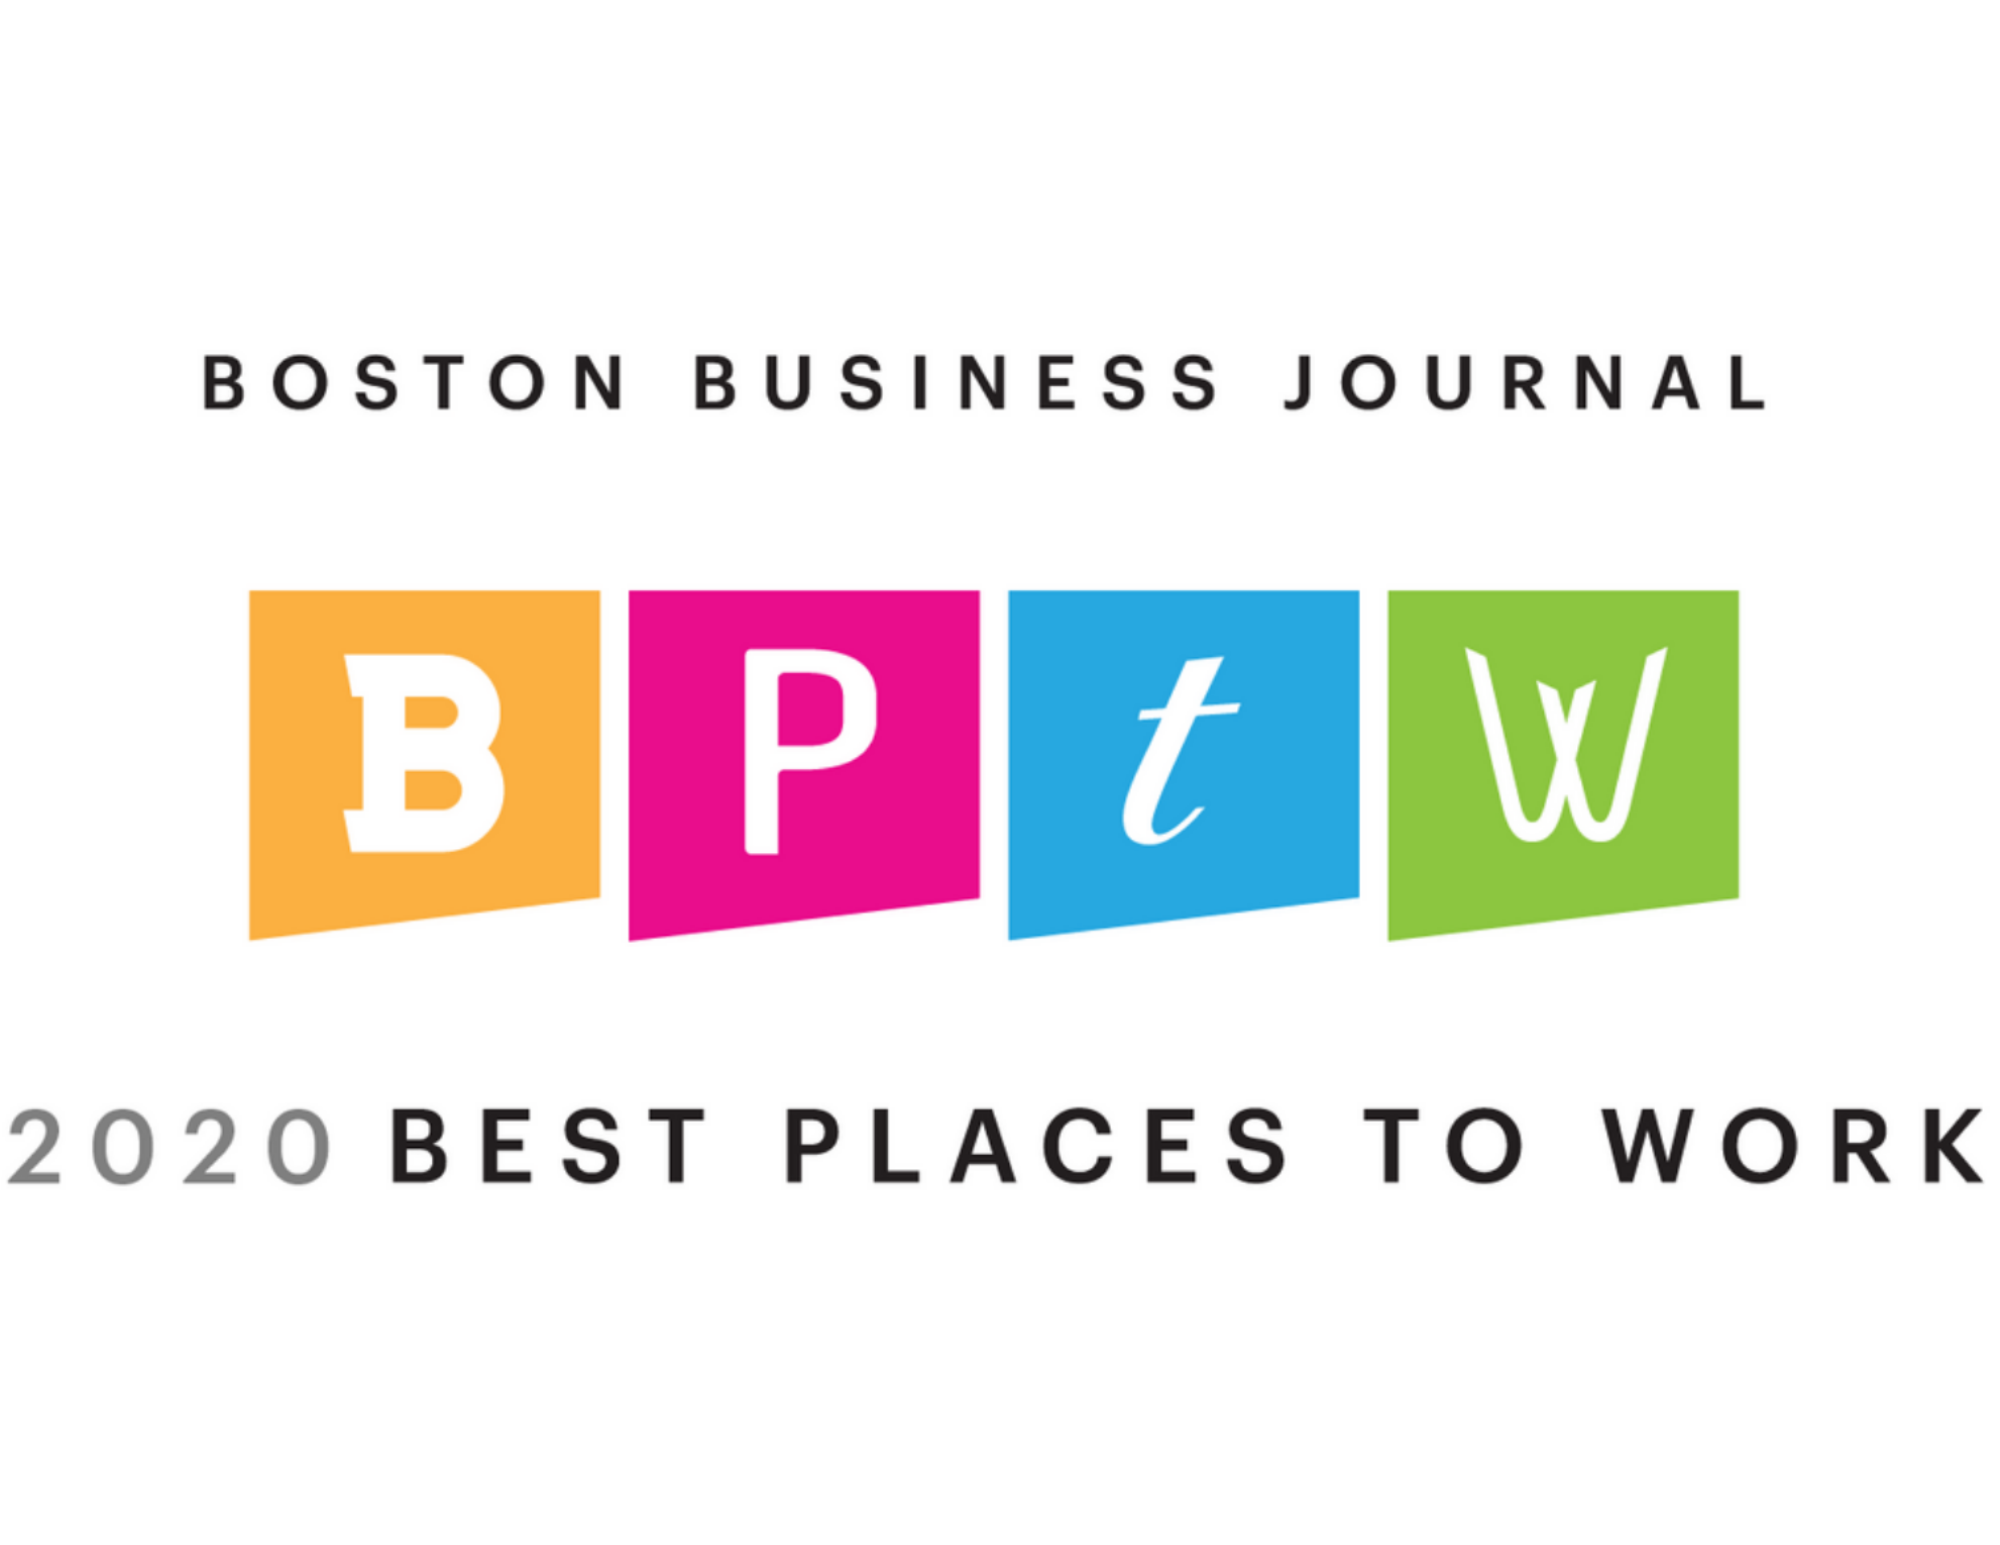 Boston Business Journal Announces Best Places to Work Rankings Image